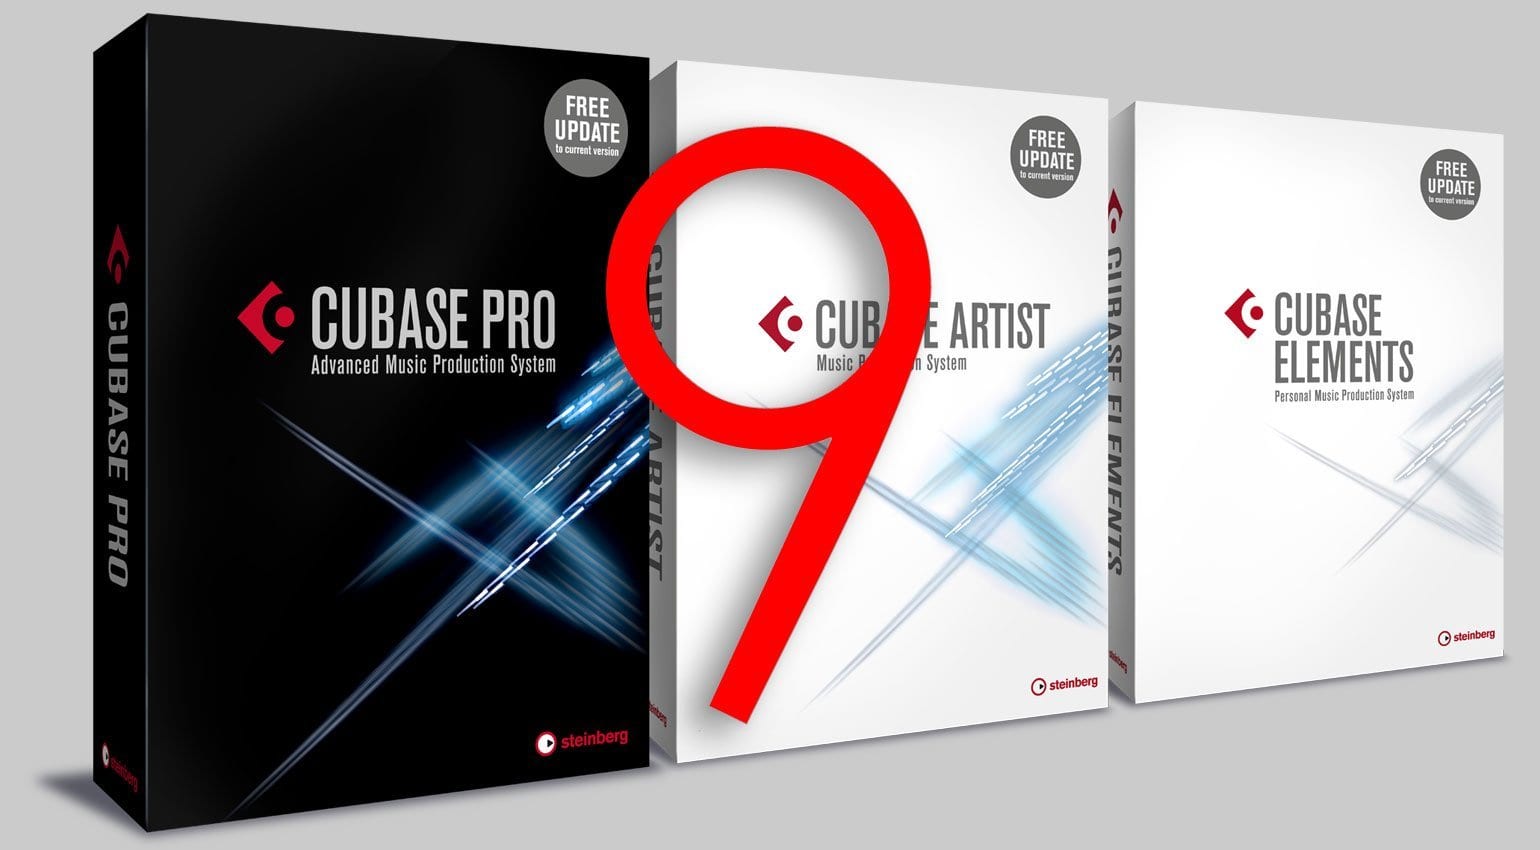 Cubase 9 launched: Steinberg releases major updates for Pro, Artist 